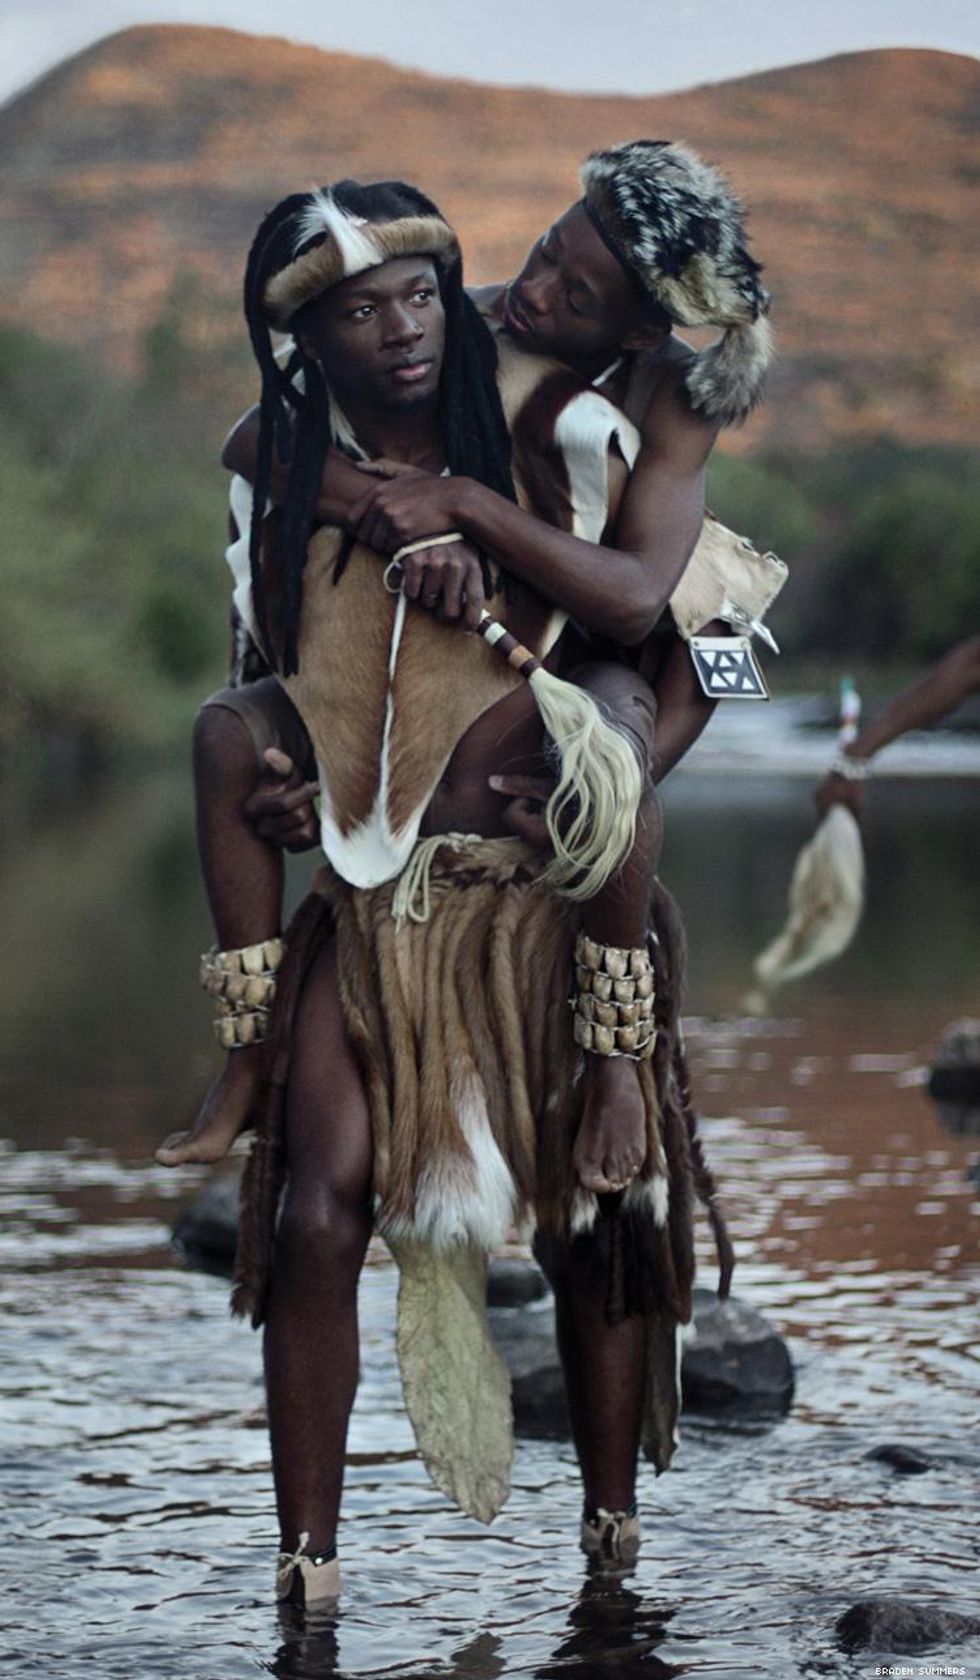 A gay South African Zulu couple by Braden Summers